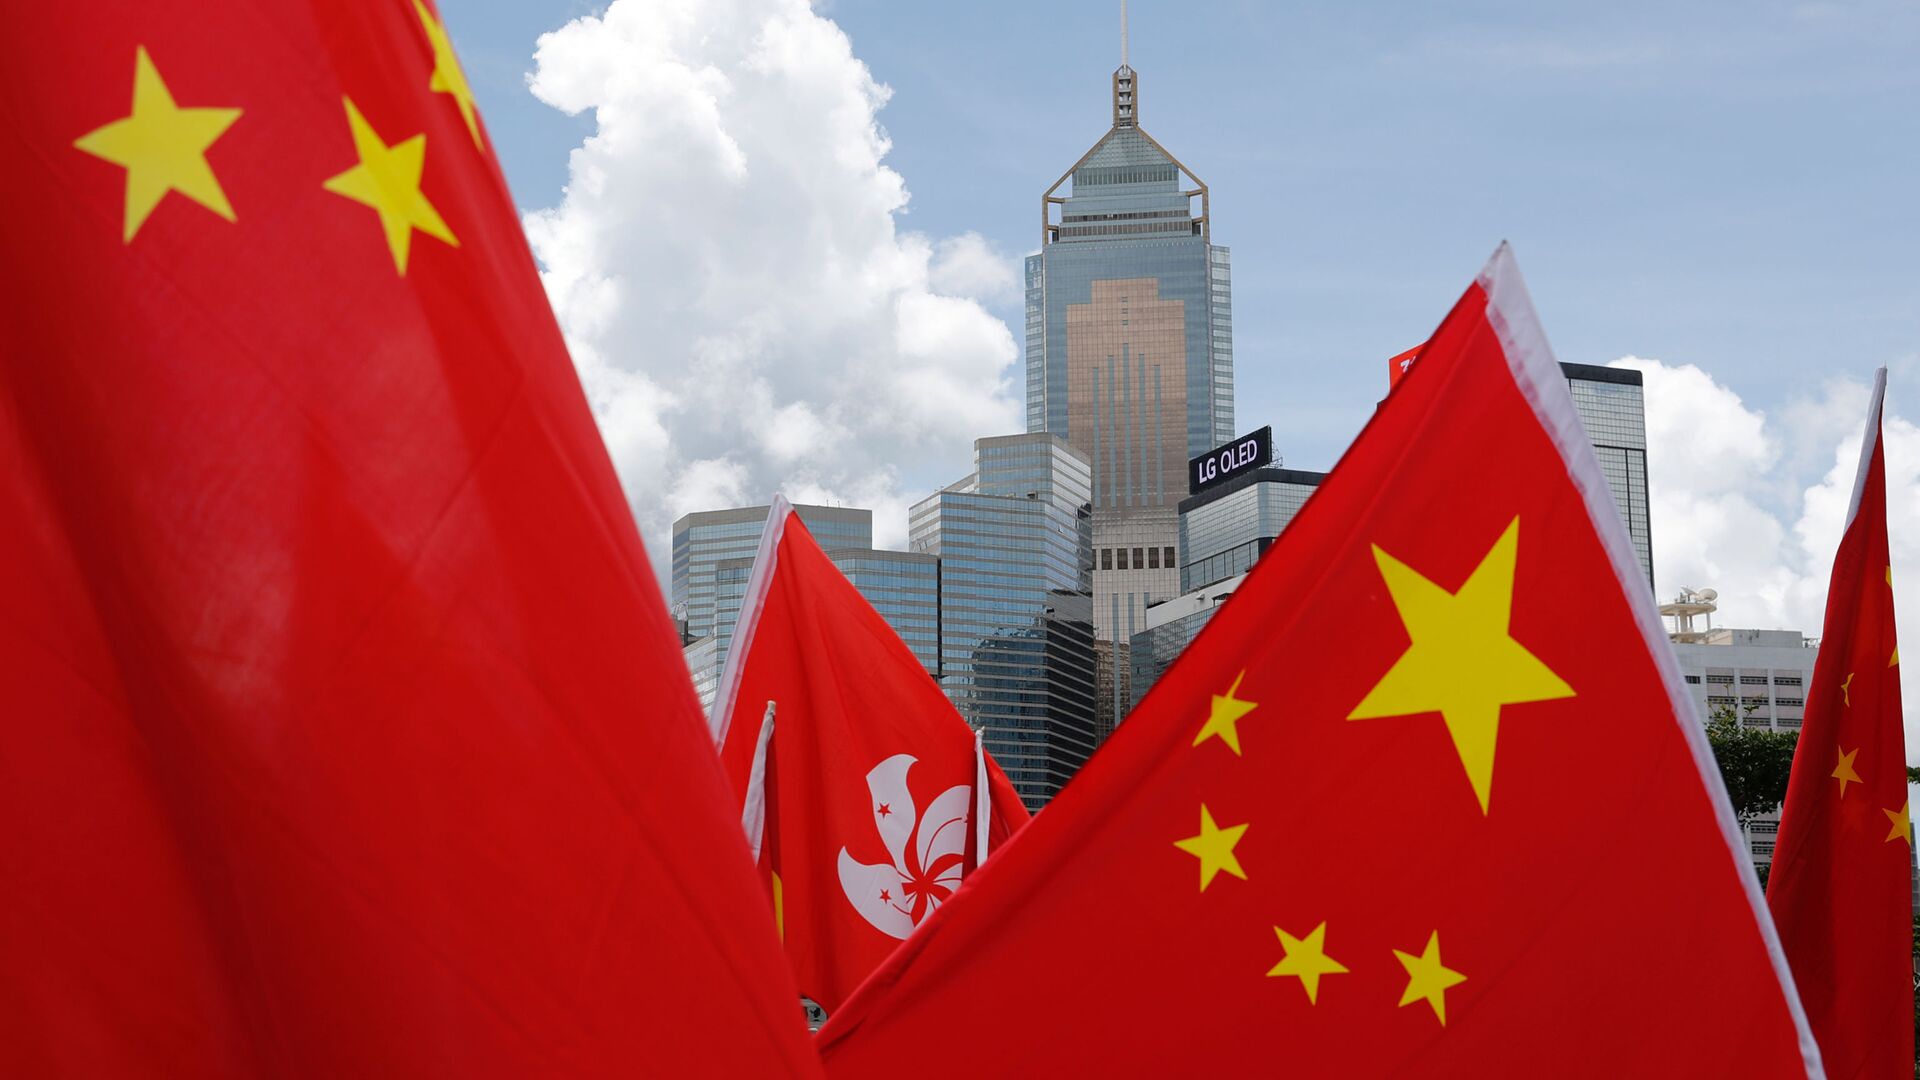 Buildings are seen above Hong Kong and Chinese flags, as pro-China supporters celebration after China's parliament passes national security law for Hong Kong, in Hong Kong, China June 30, 2020. REUTERS/Tyrone Siu - Sputnik International, 1920, 11.03.2021